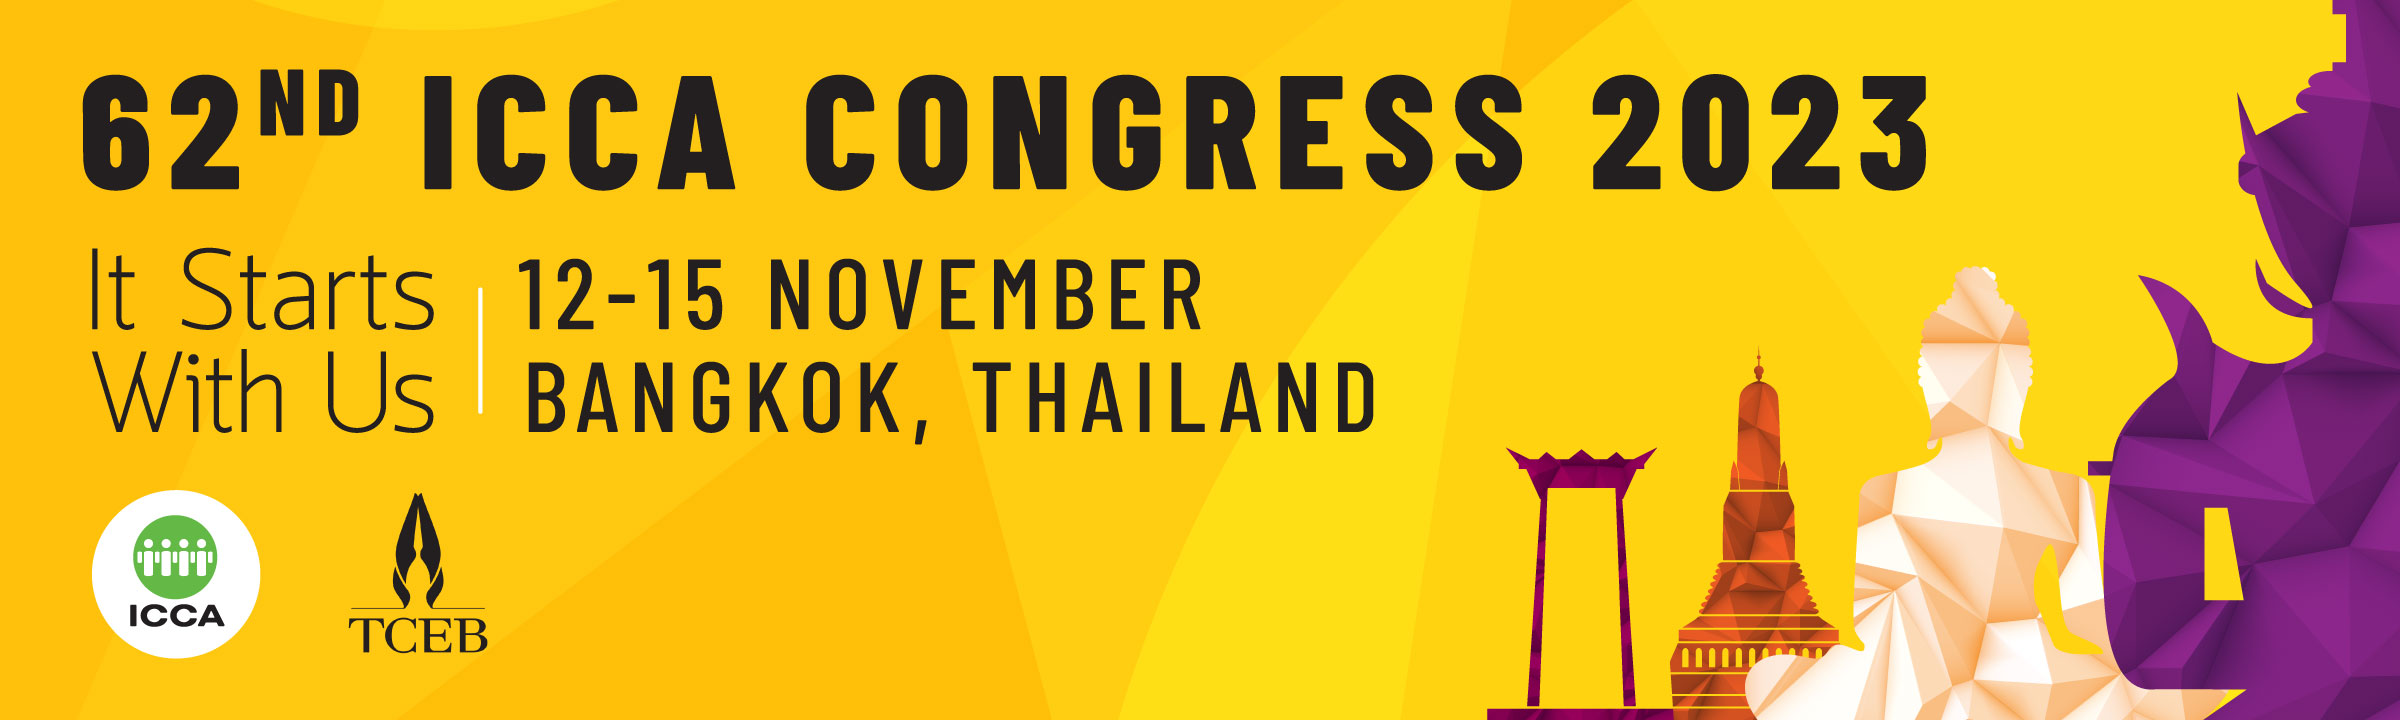 The 62nd ICCA Congress will be held in Bangkok from November 12-15, 2023. Photo: ICCA